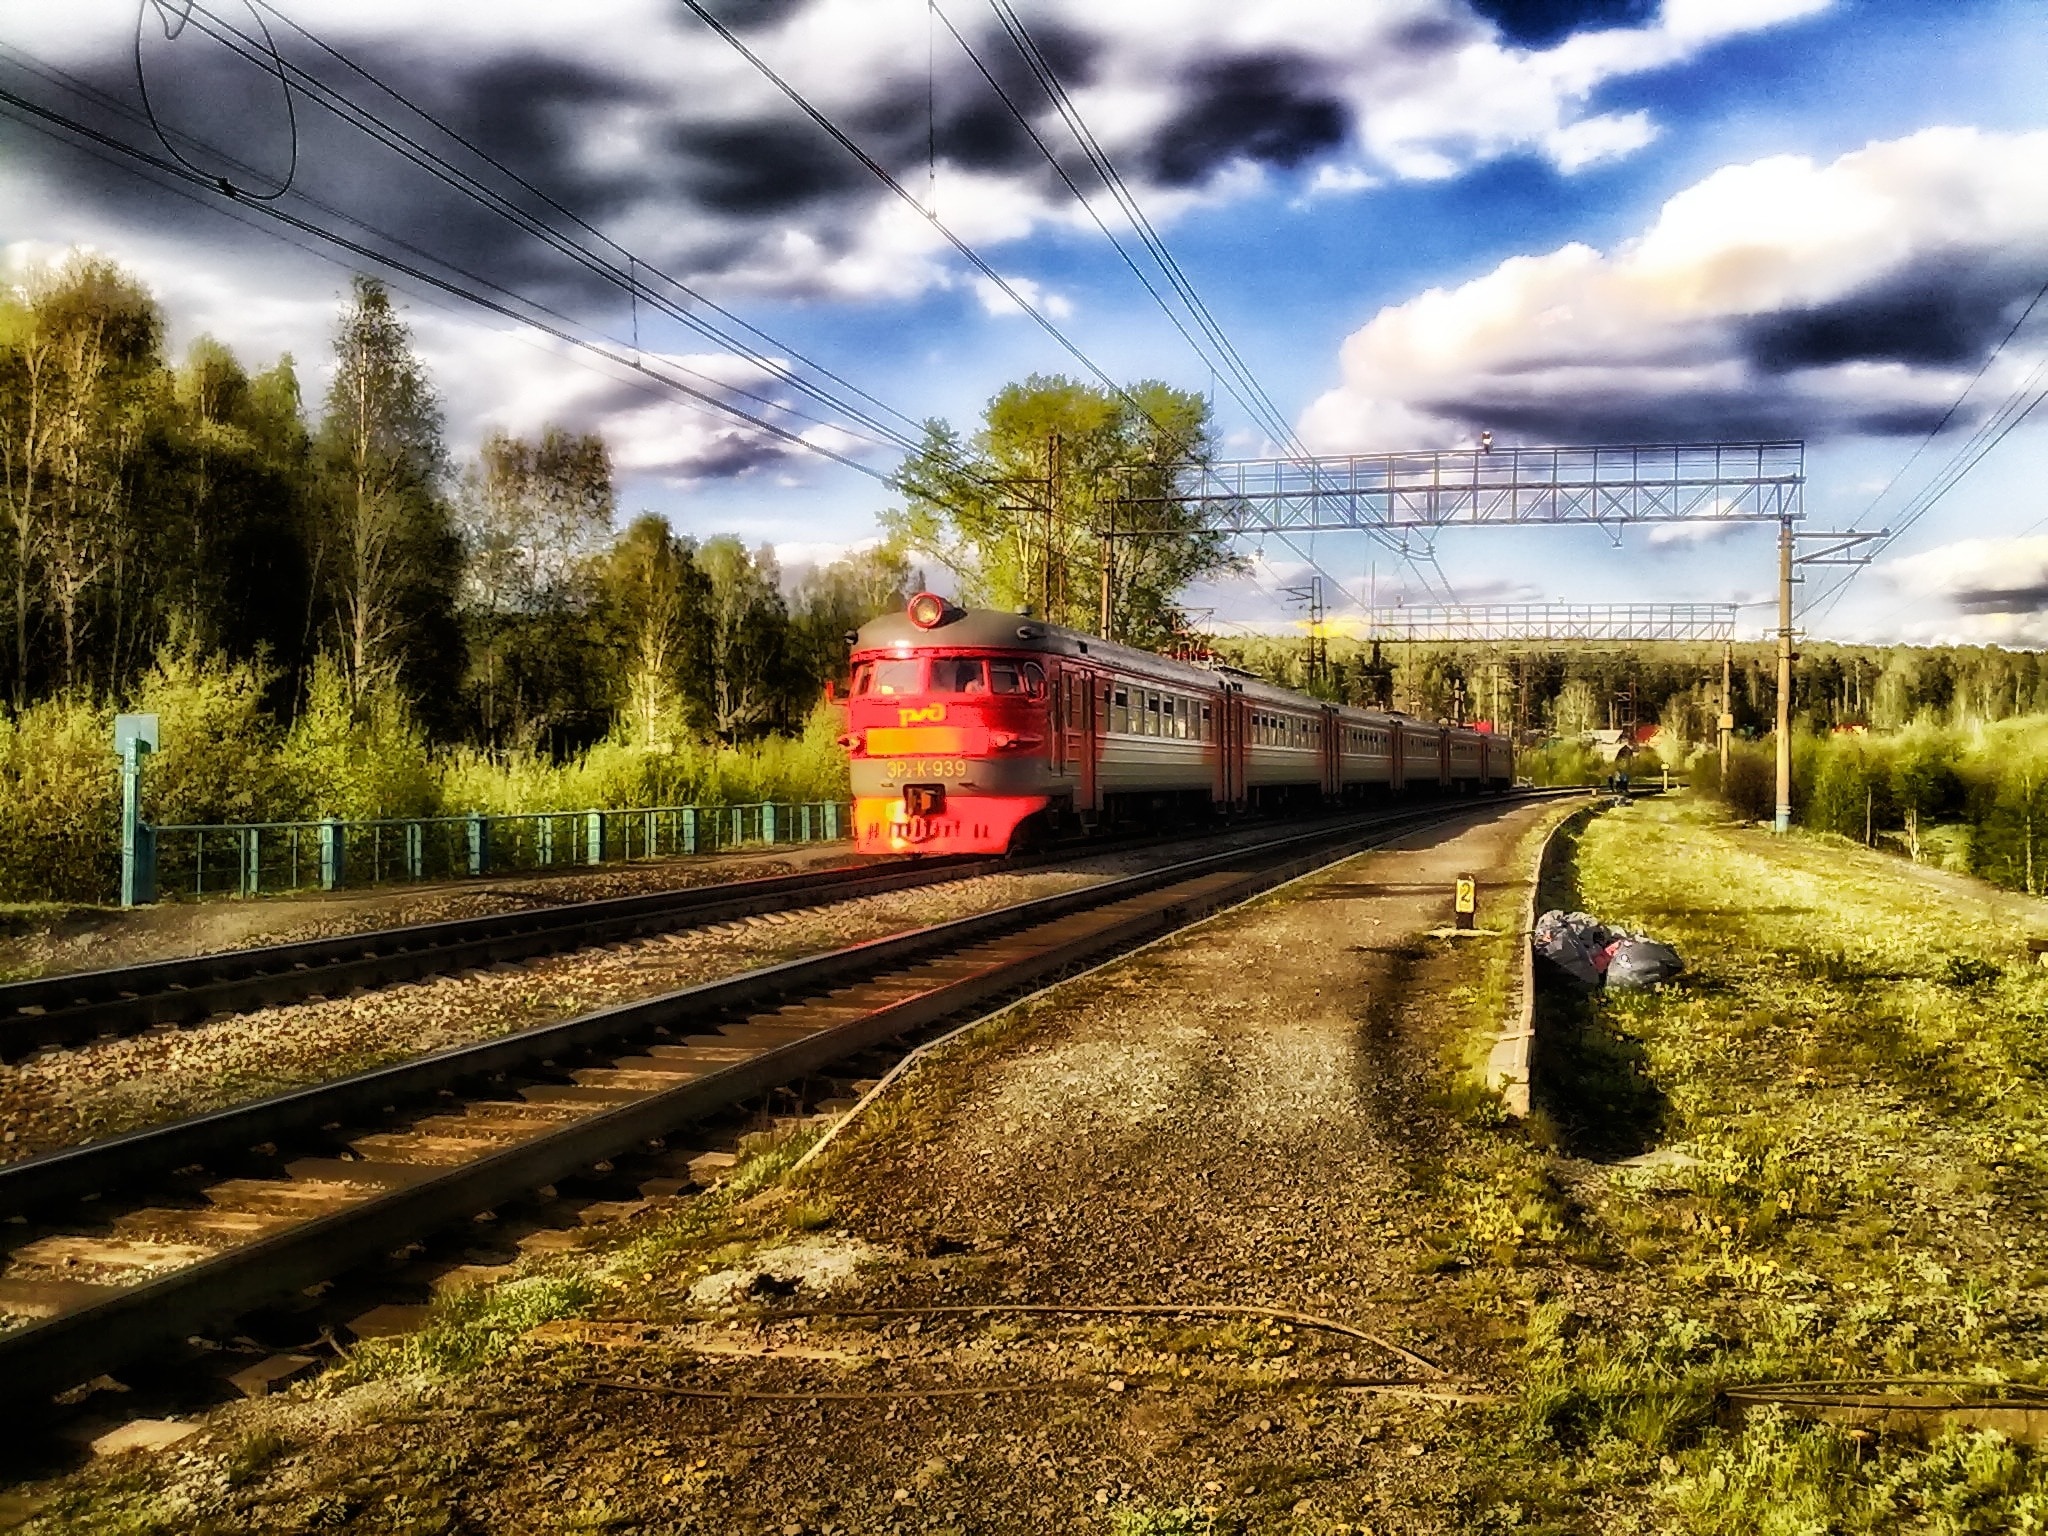 red steel train on rails during daytime